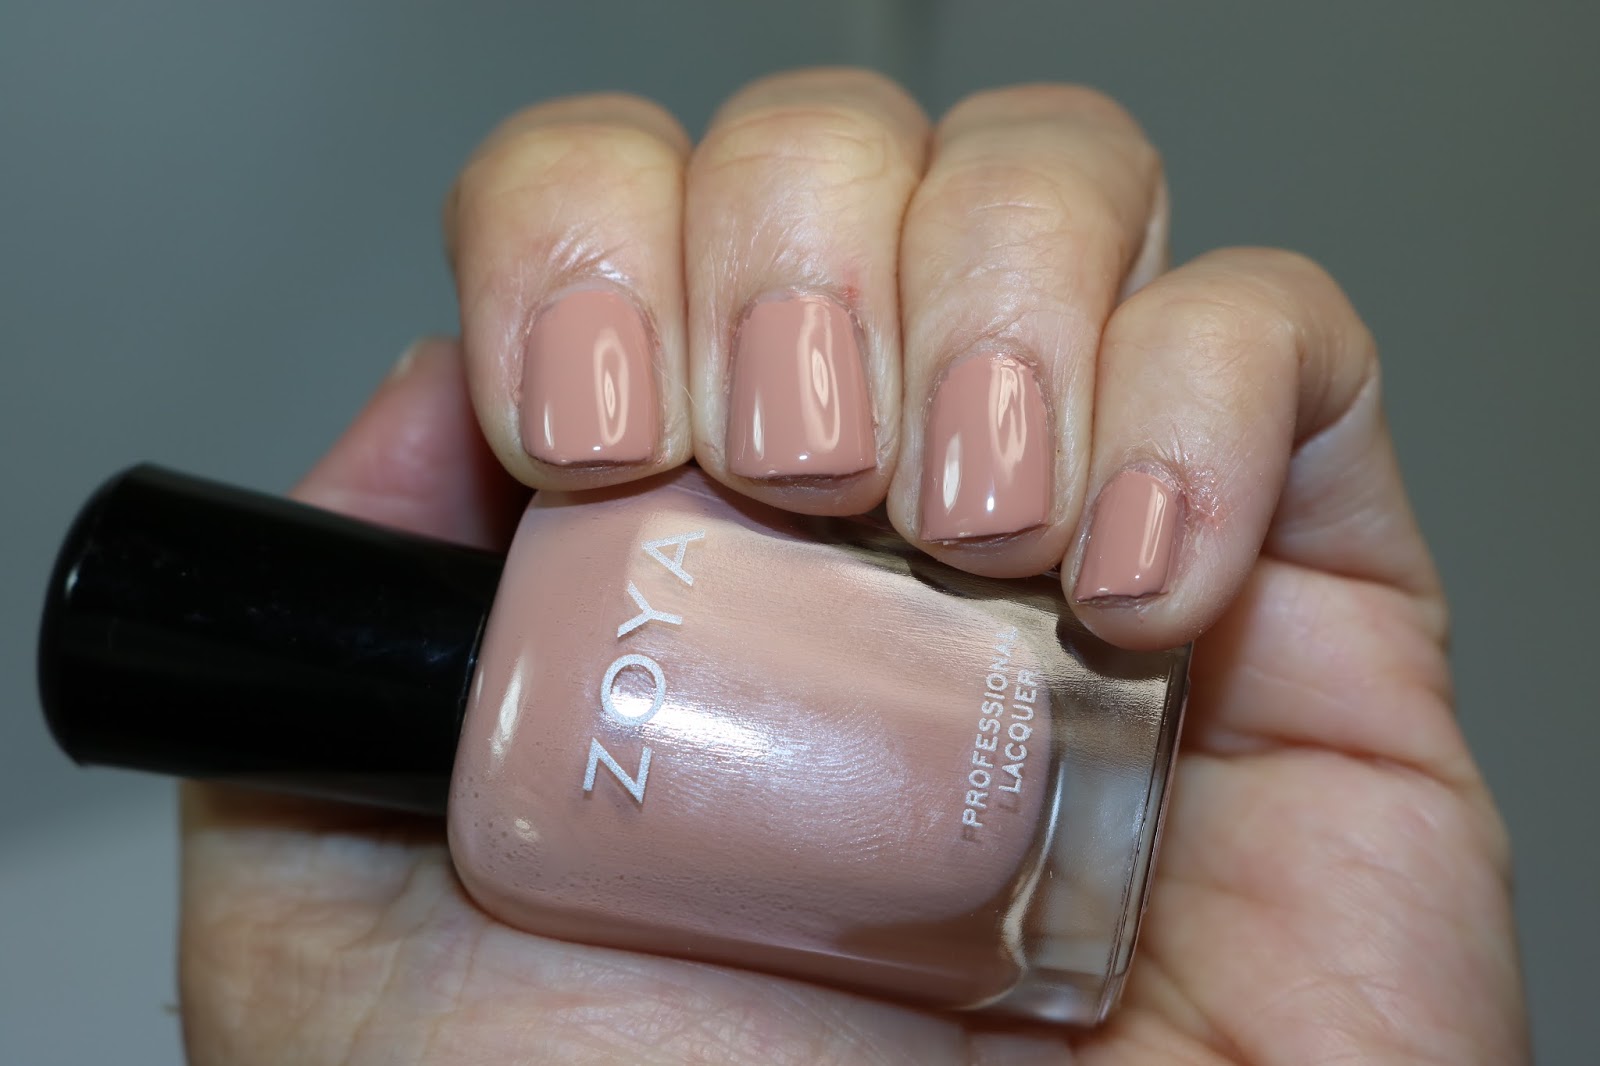 Zoya Nail Polish in "Palm Springs Collection" - wide 5